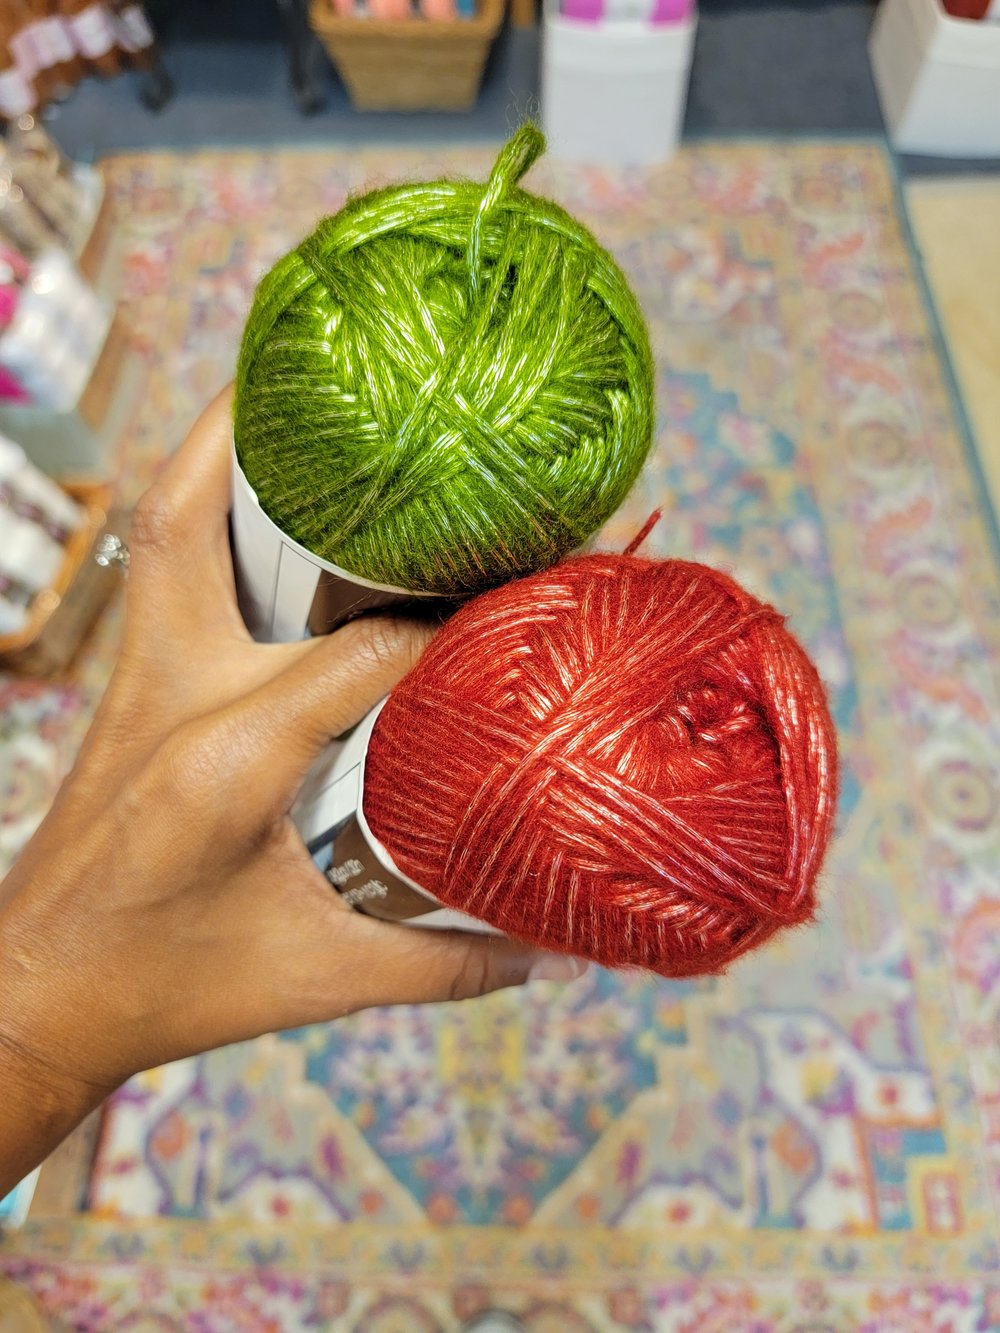 Elegant Wine-colored Metallic Yarn for Crochet Knitting and Crafting